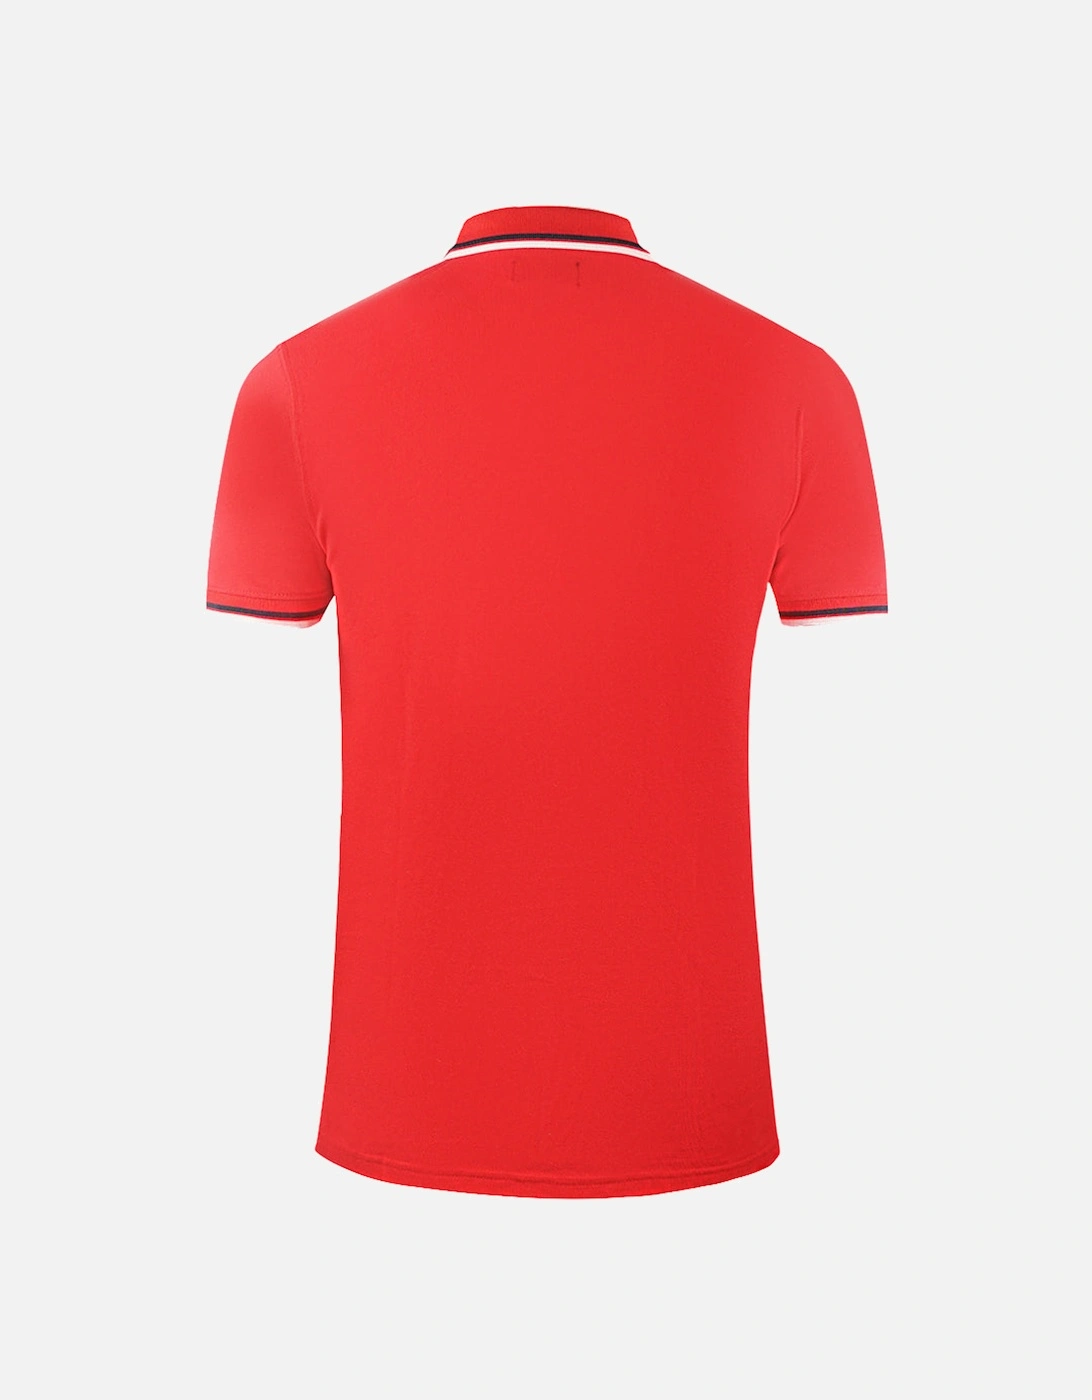 Twin Tipped Collar Brand Logo Red Polo Shirt